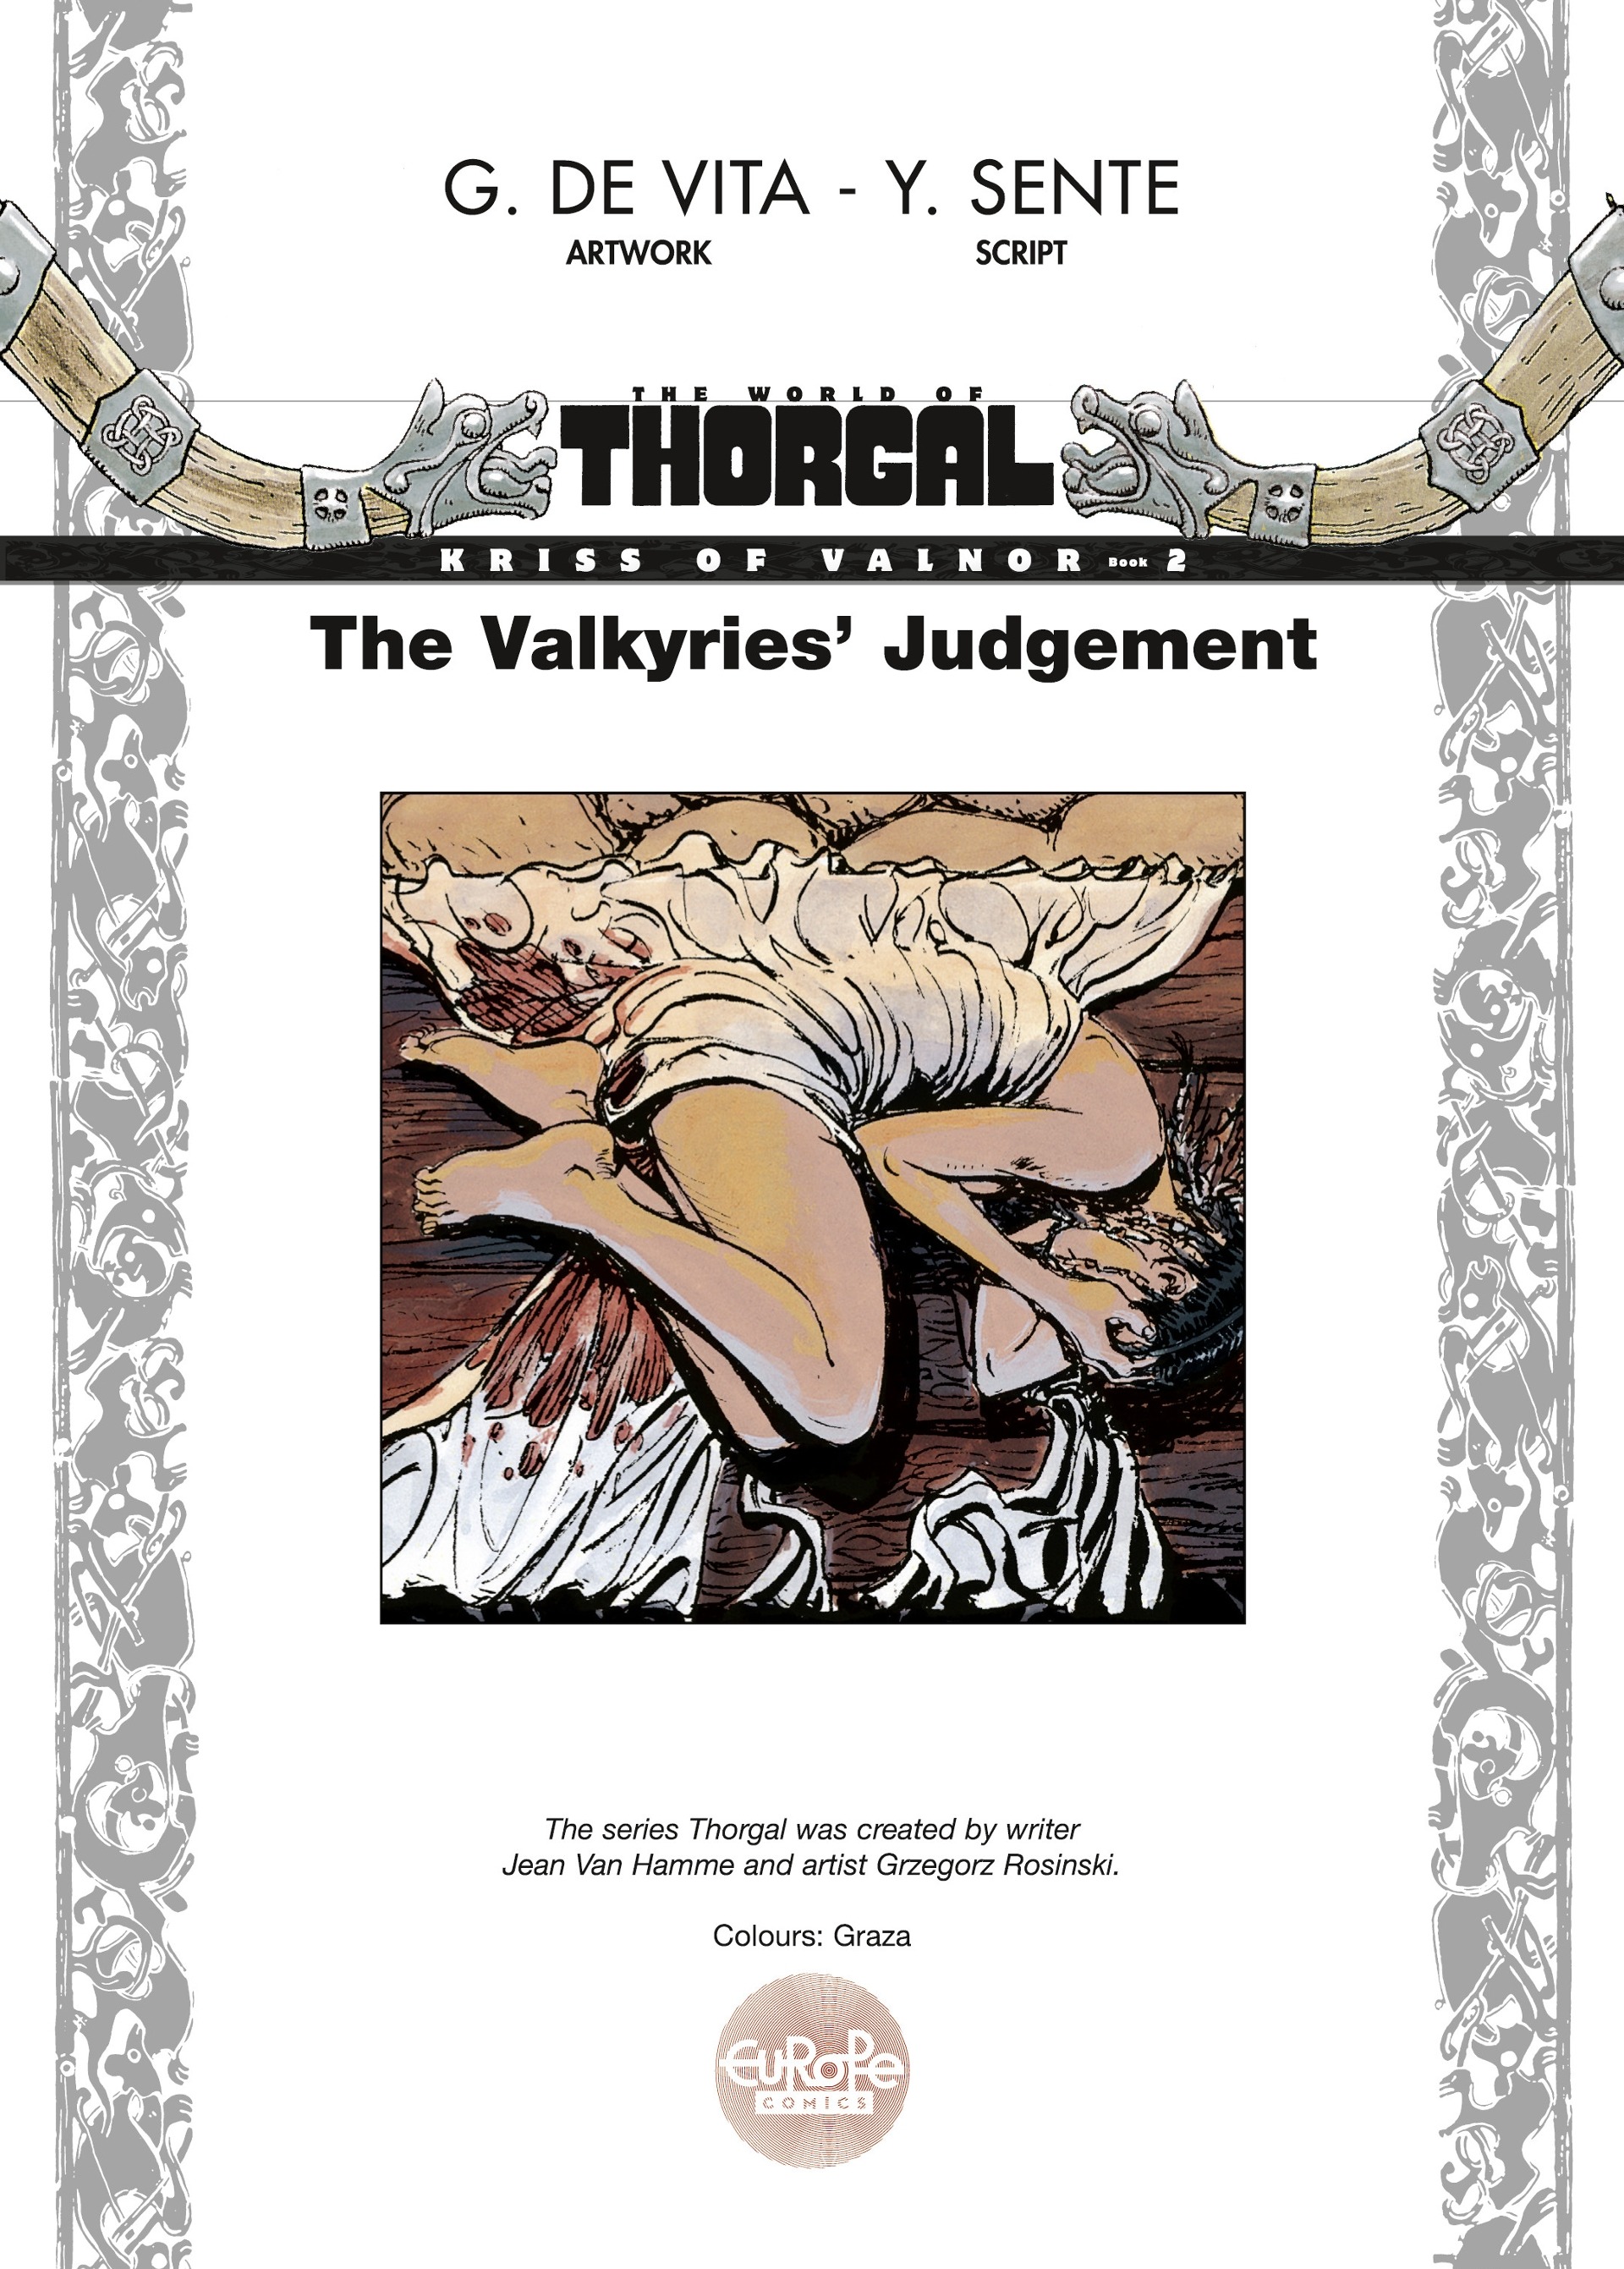 Read online Kriss of Valnor: The Valkyries' Judgement comic -  Issue # Full - 3